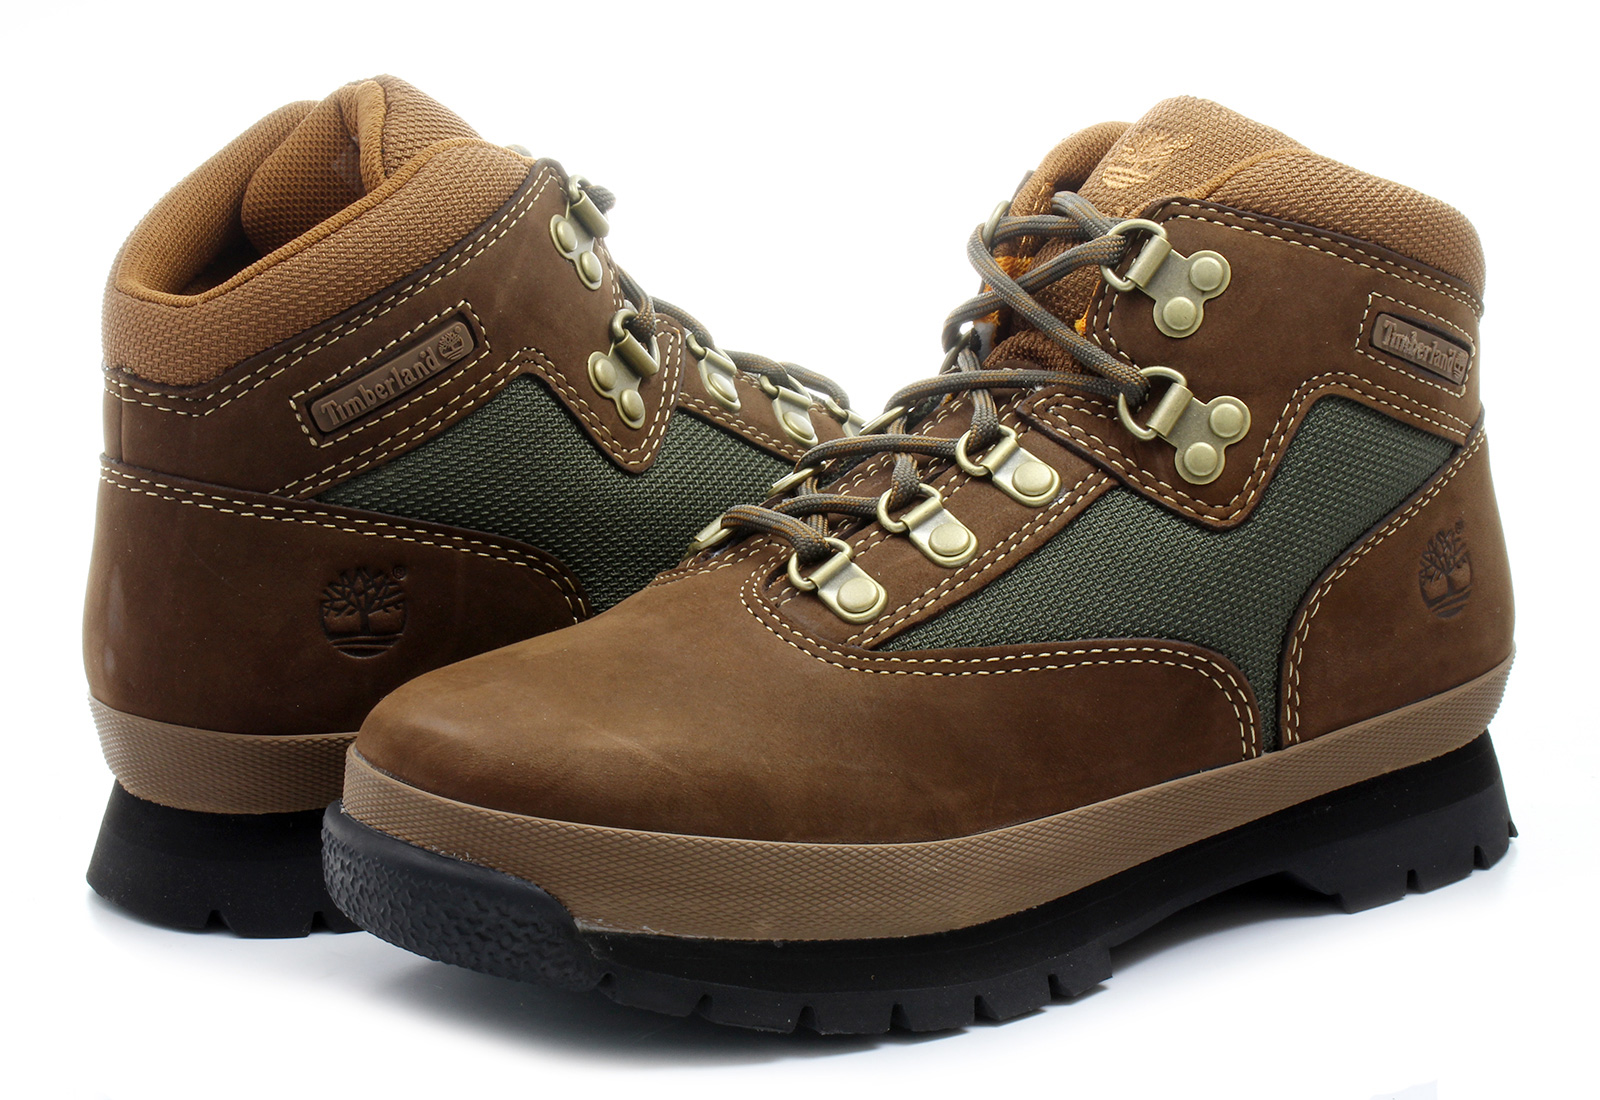 Timberland Boots - Euro Hiker - a12vr-brn - Online shop for sneakers ...